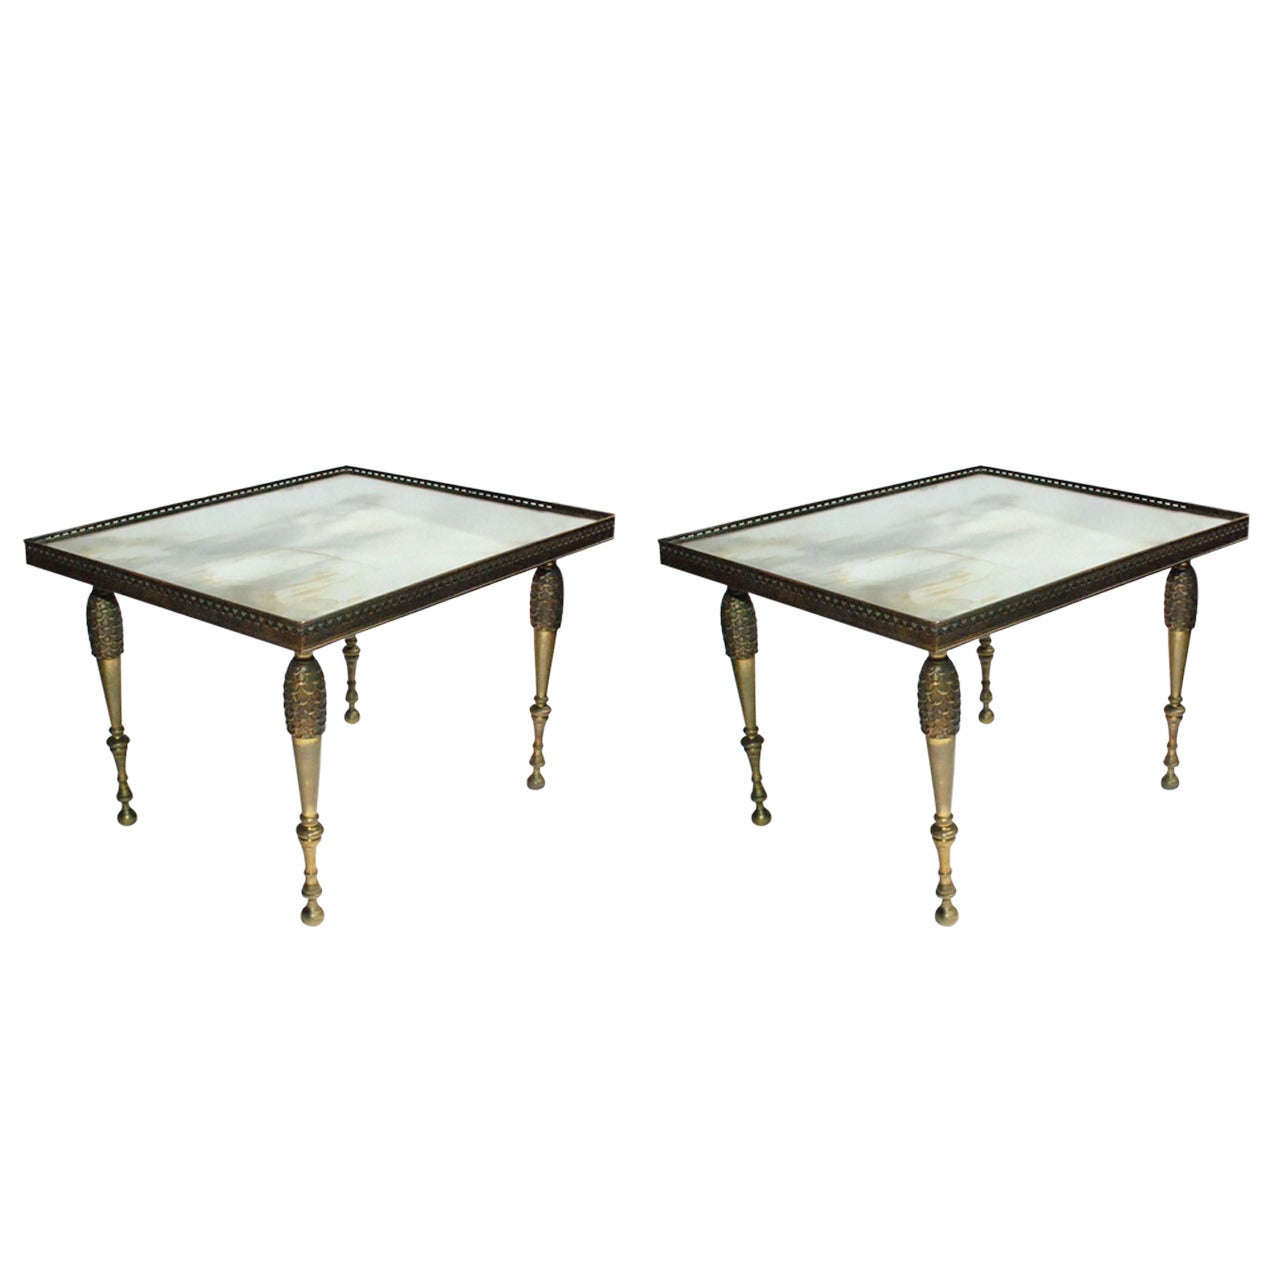 Pair of Hollywood Regency Mirrored Bronze Side Tables